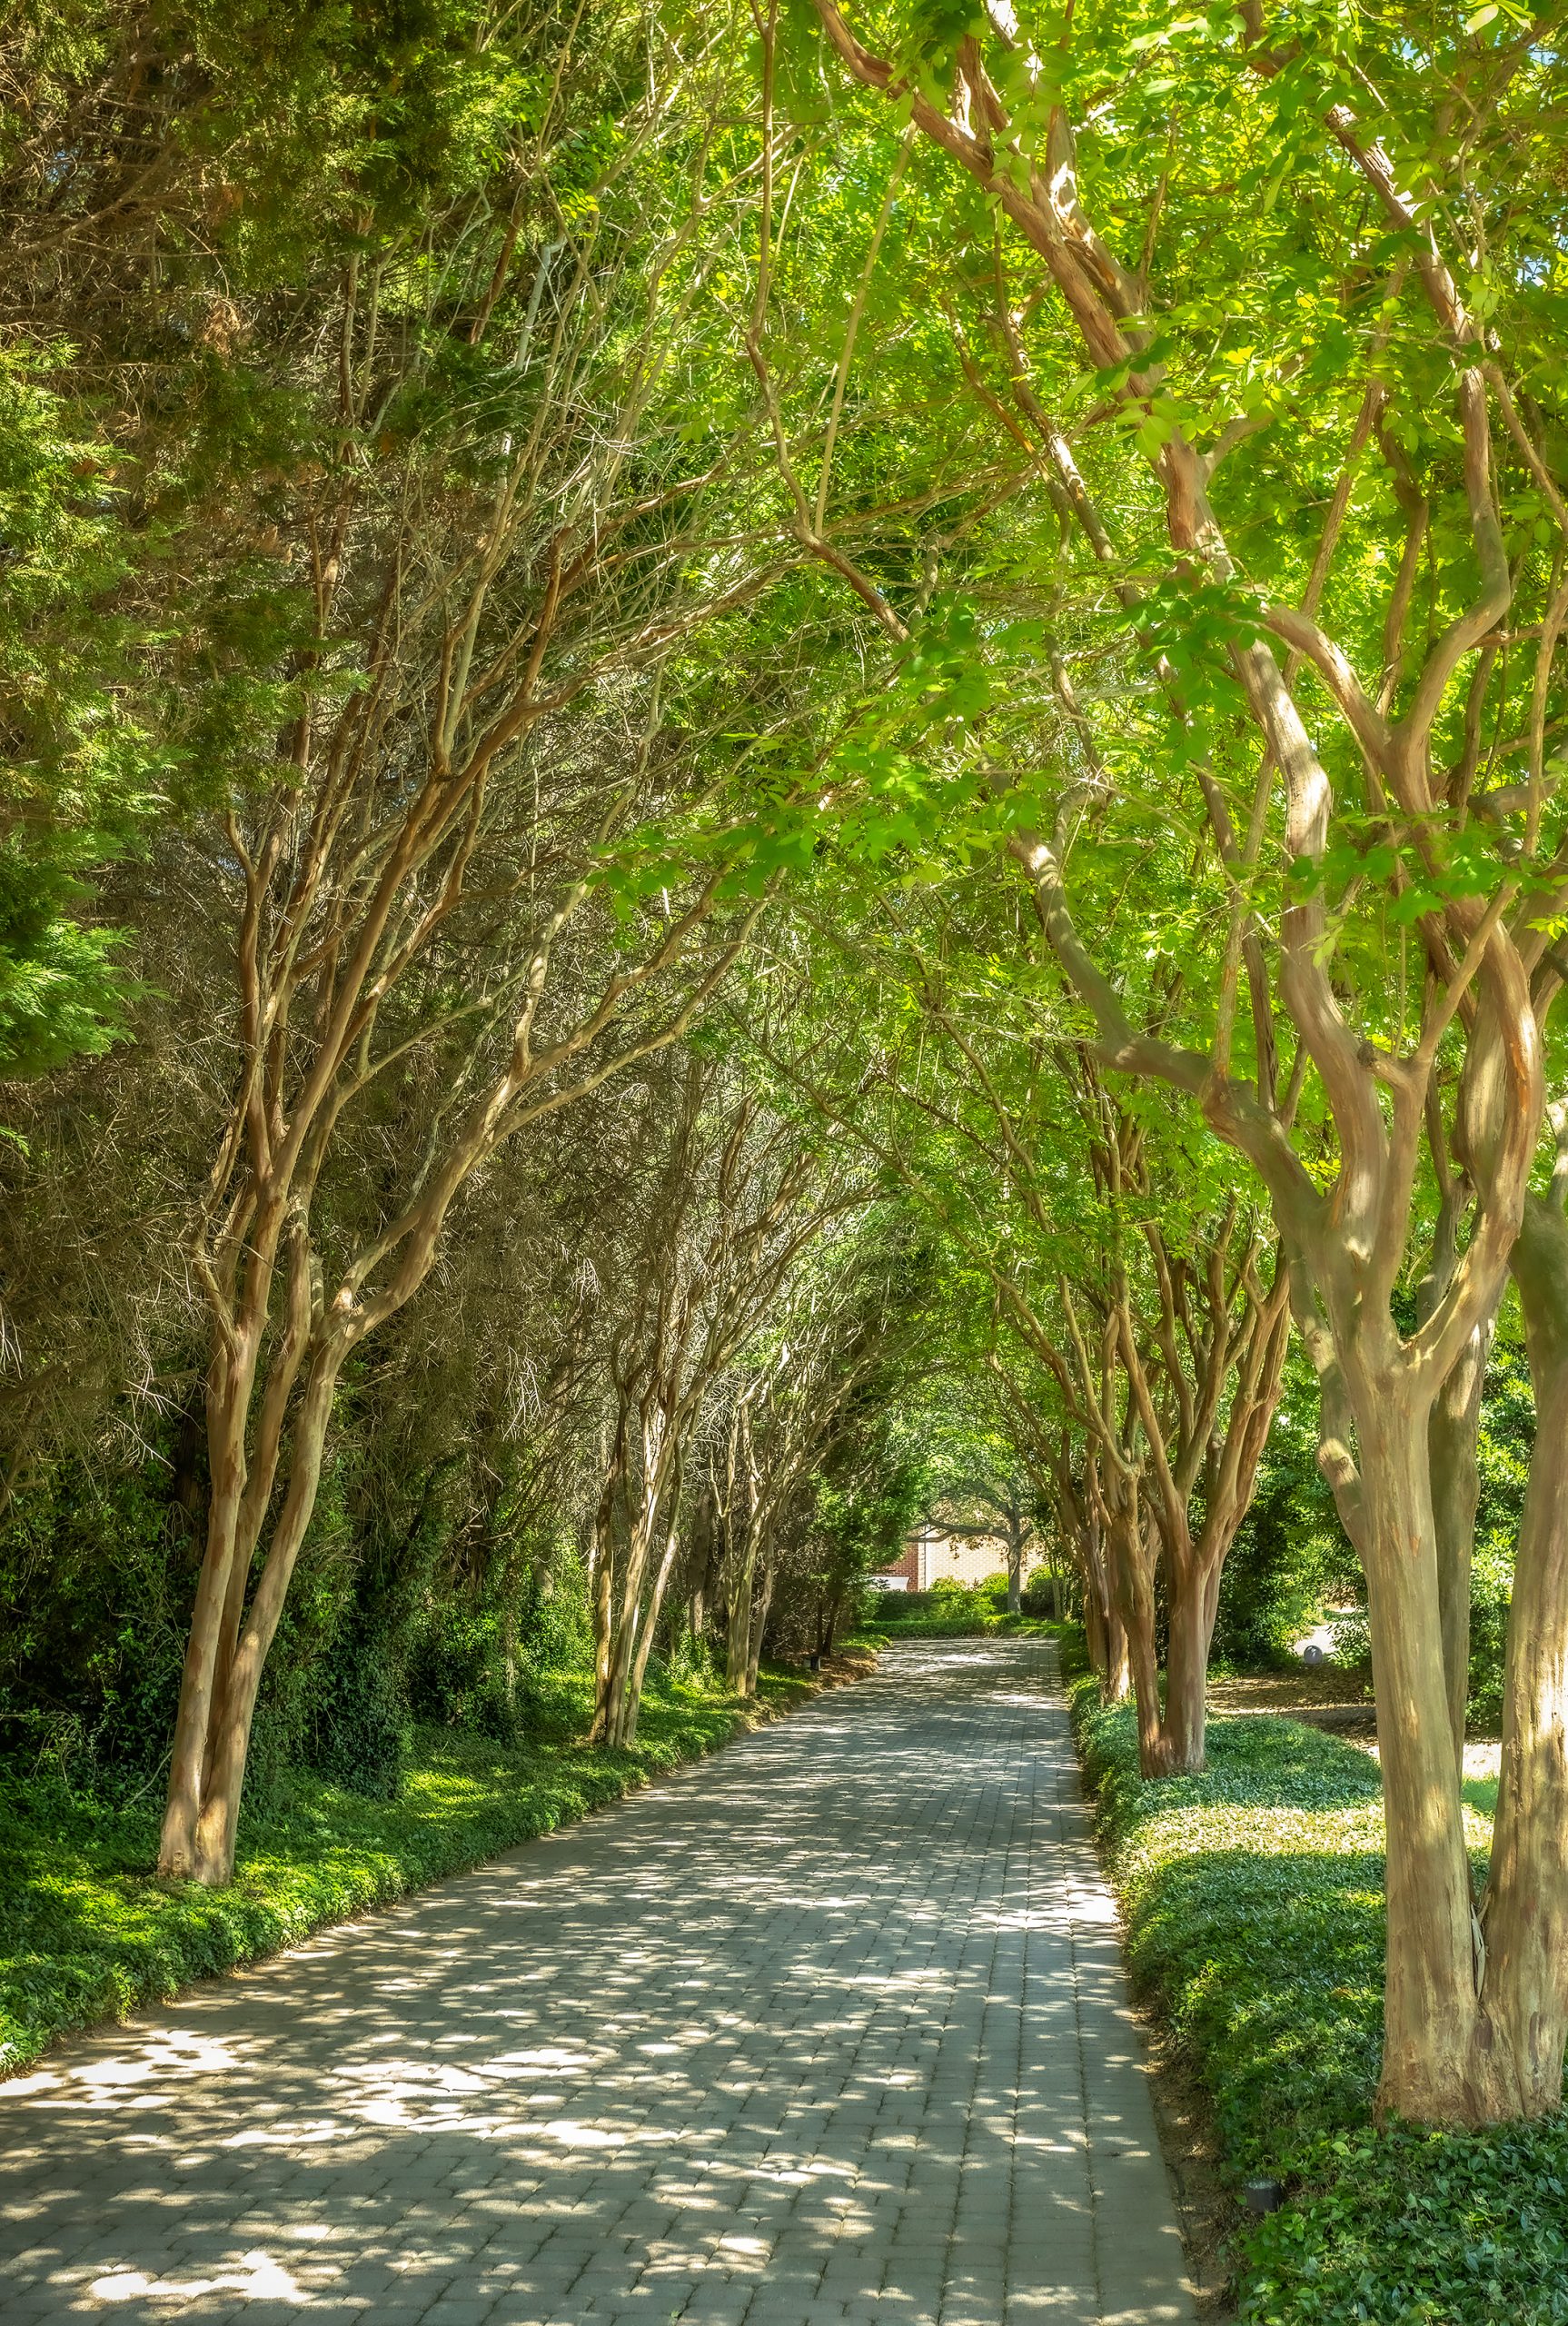 The 750-foot-long winding driveway is handlaid with cobblestone pavers and shaded by crepe myrtles.
